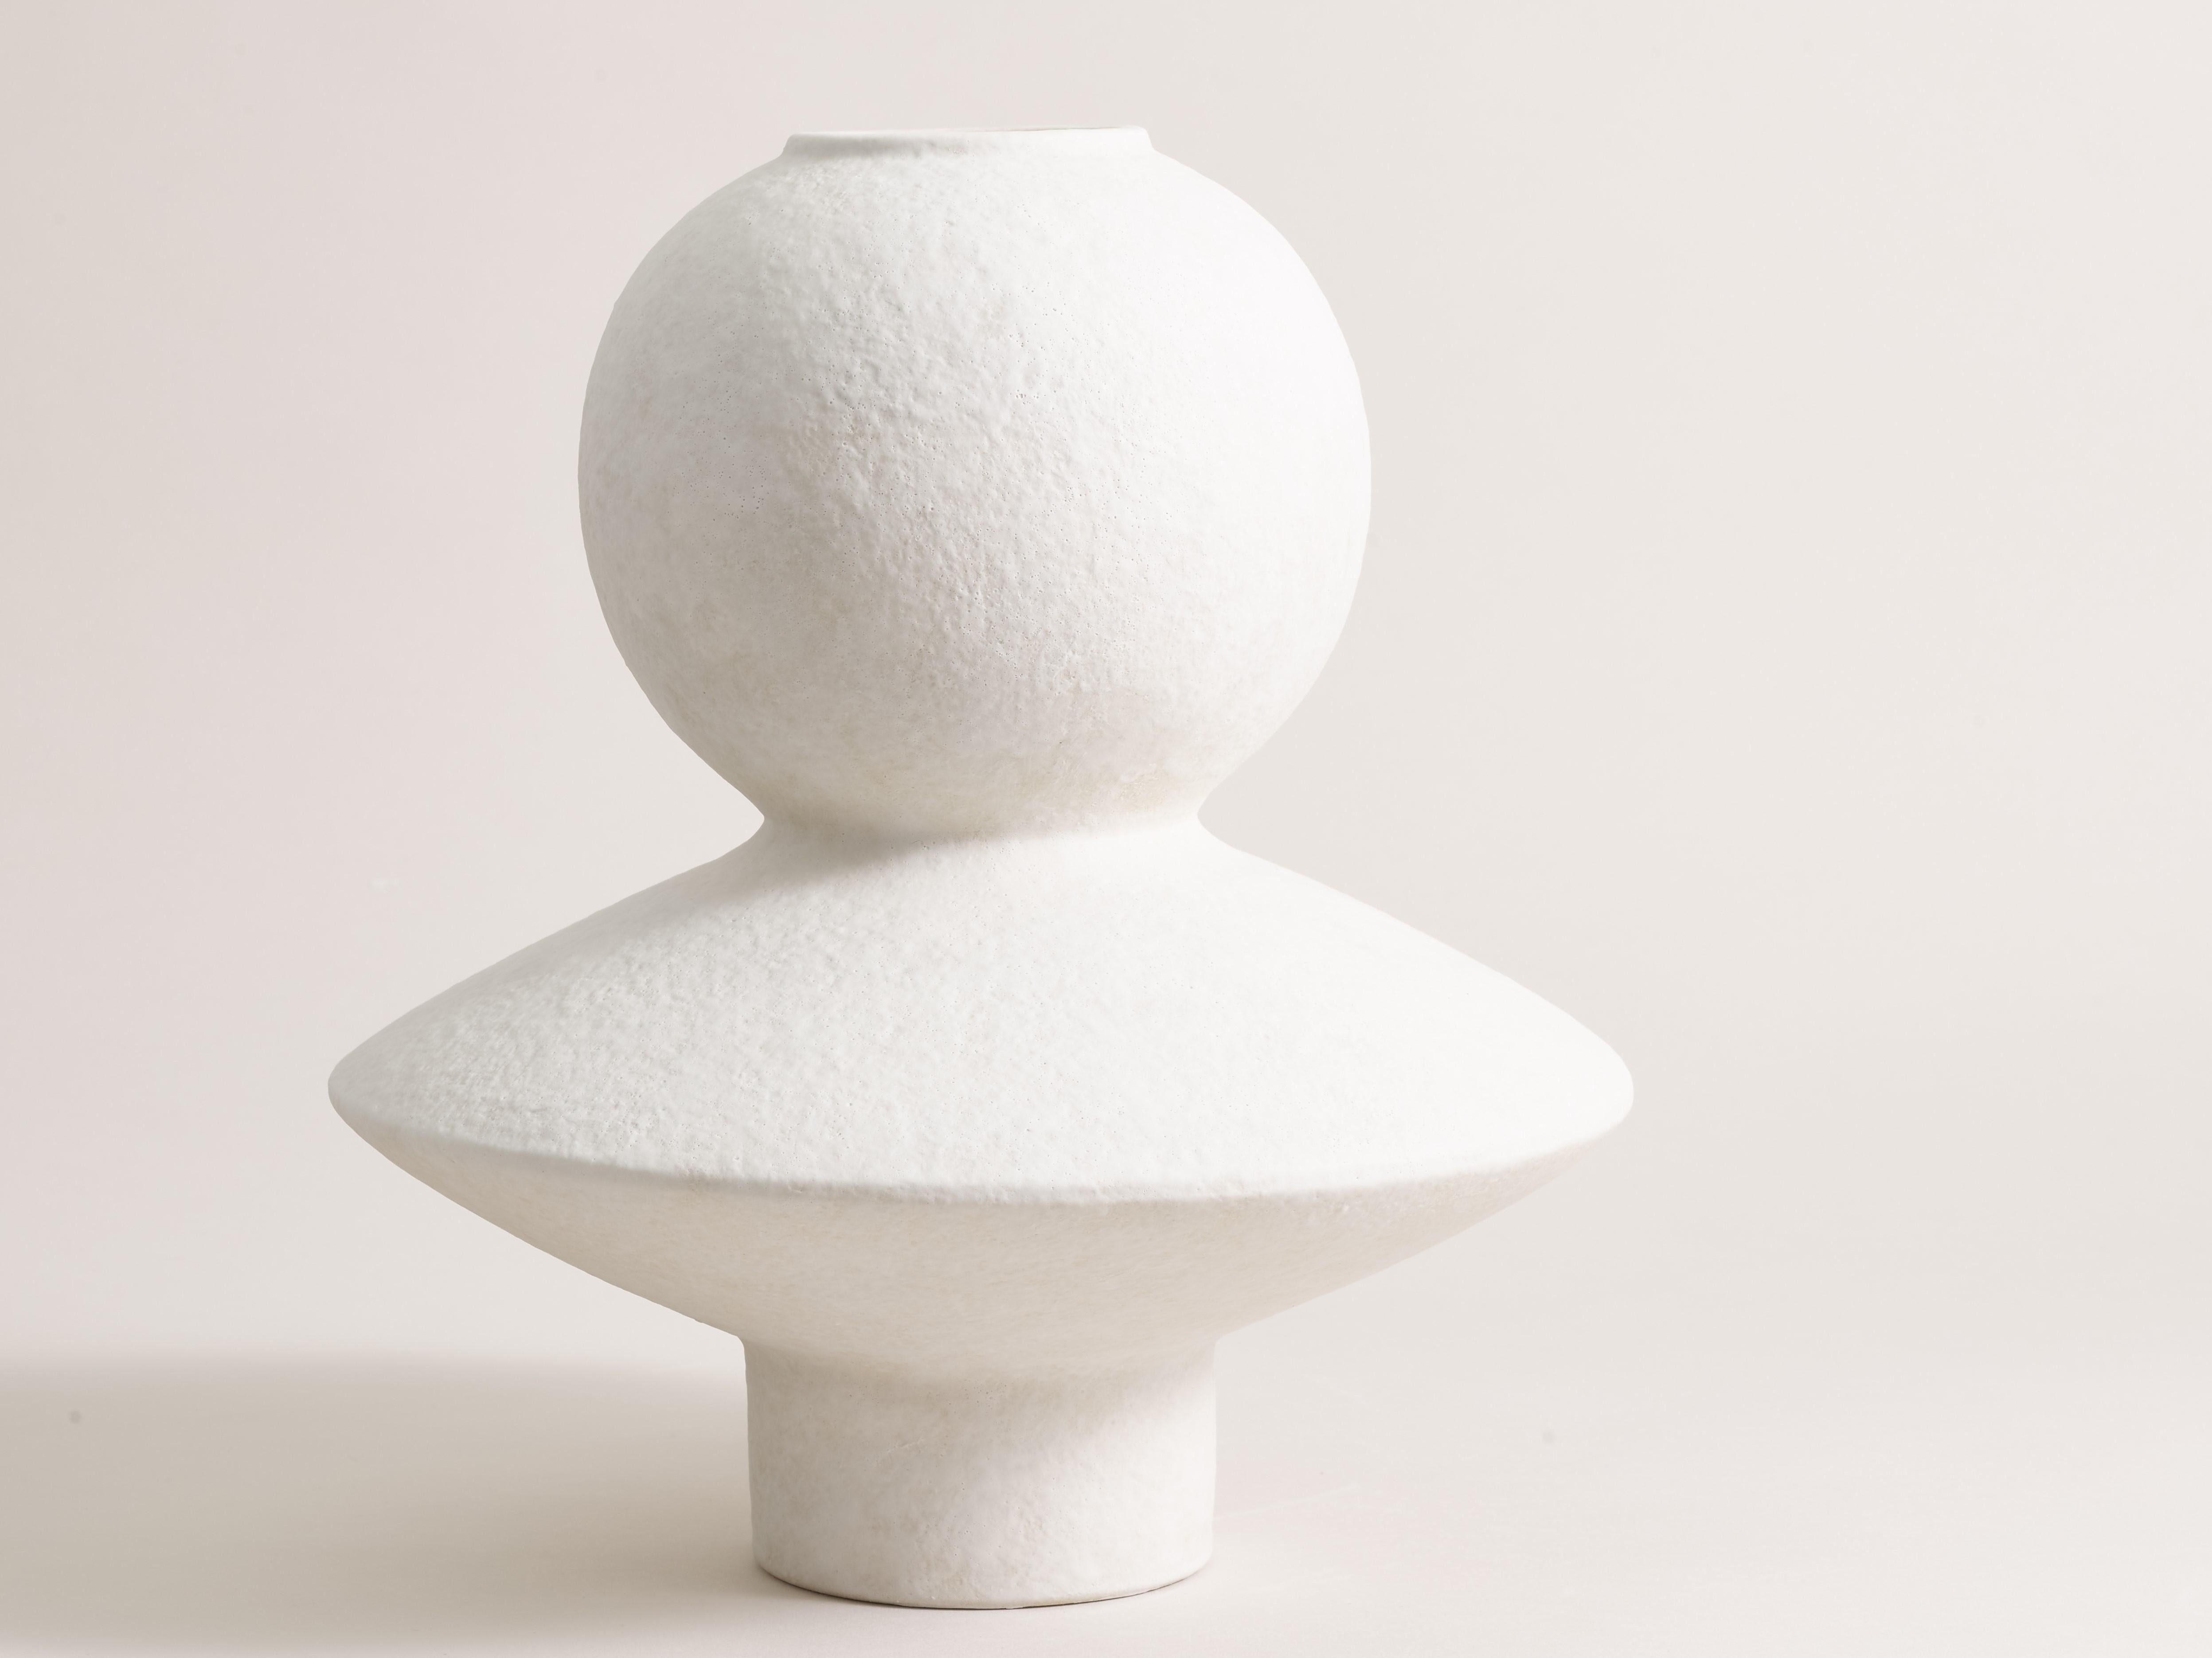 Handcrafted vase 074 by Lovebuch
Dimensions: Ø 25 x H 29 cm
Materials: Sandstone, porcelain, handcrafted piece

Katia works with wood and clay, these raw, powerfully expressive materials are shaped to create a poetry of objects that inhabit our